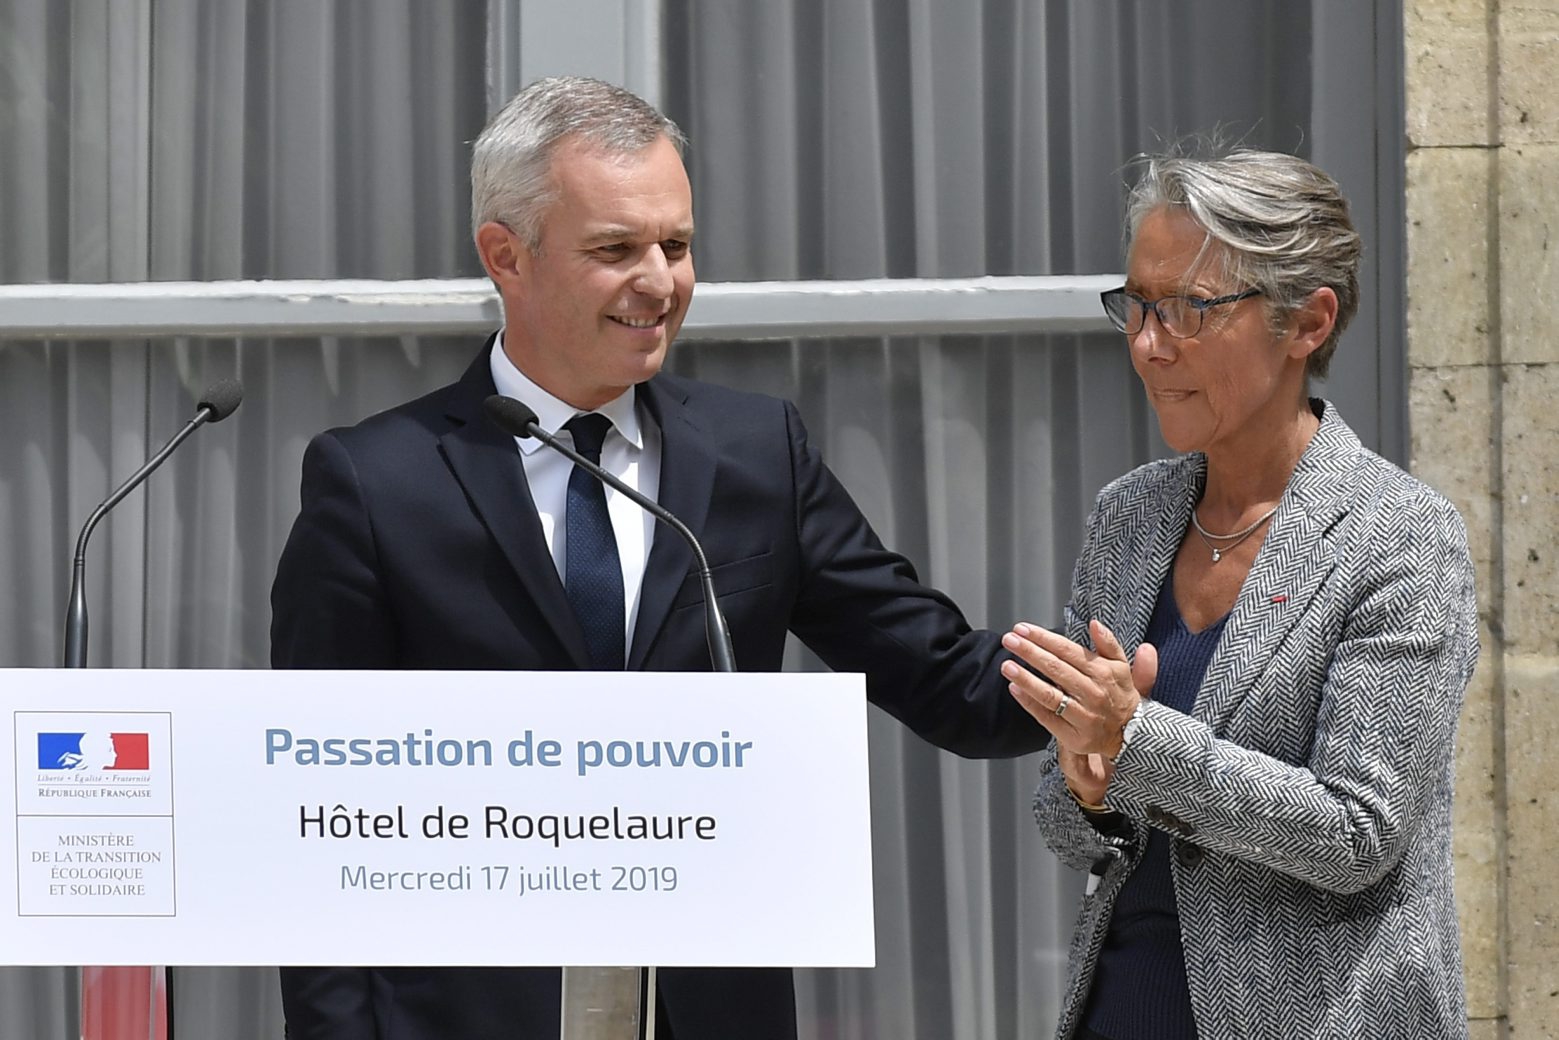 epa07722466 Former Environment Minister Francois de Rugy (L) speaks next to the newly-appointed French Environment Minister Elisabeth Borne (R) during a handover ceremony in Paris, France, 17 July 2019. Francois de Rugy presented his resignation to the French Prime Minister on 16 July 2019, following a controversy about the alleged misuse of public funds. According to French news website Mediapart on 10 July 2019, the then-President of the French National Assembly Francois de Rugy organized several sumptuous private dinners with public funds at the Hotel de Lassay, residence of the President of the French National Assembly. De Rugy claimed during a press conference that they were working dinners.  EPA/JULIEN DE ROSA FRANCE GOVERNMENT ENVIRONMENT MINISTER